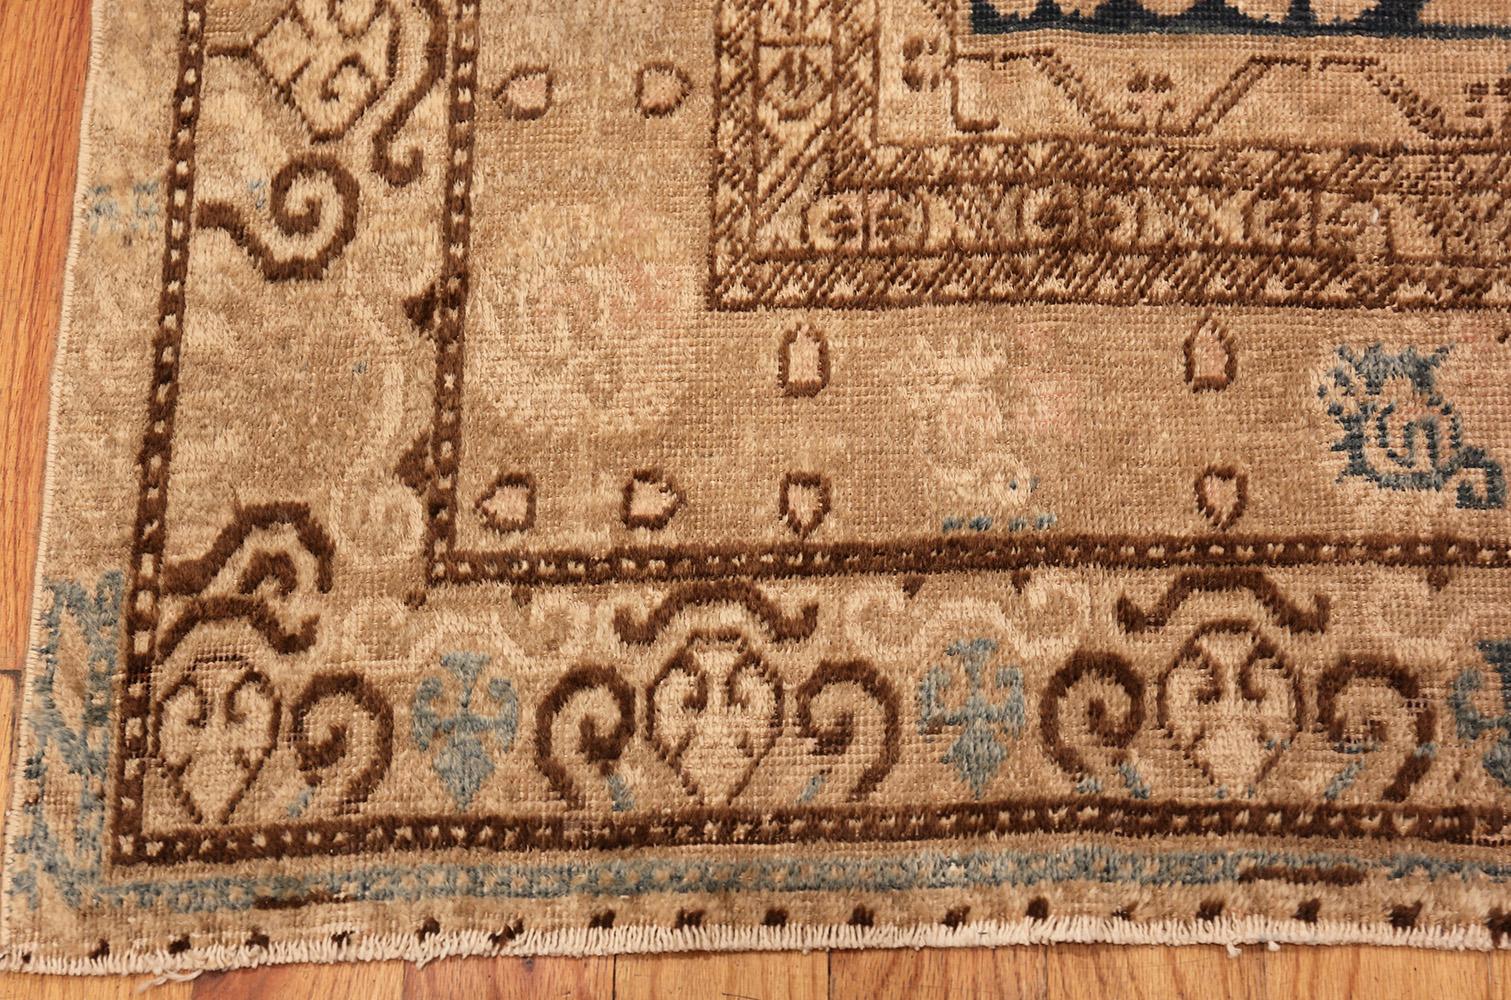 Hand-Knotted Antique Blue Pomegranate Khotan Rug. Size: 5 ft 7 in x 10 ft 6 in